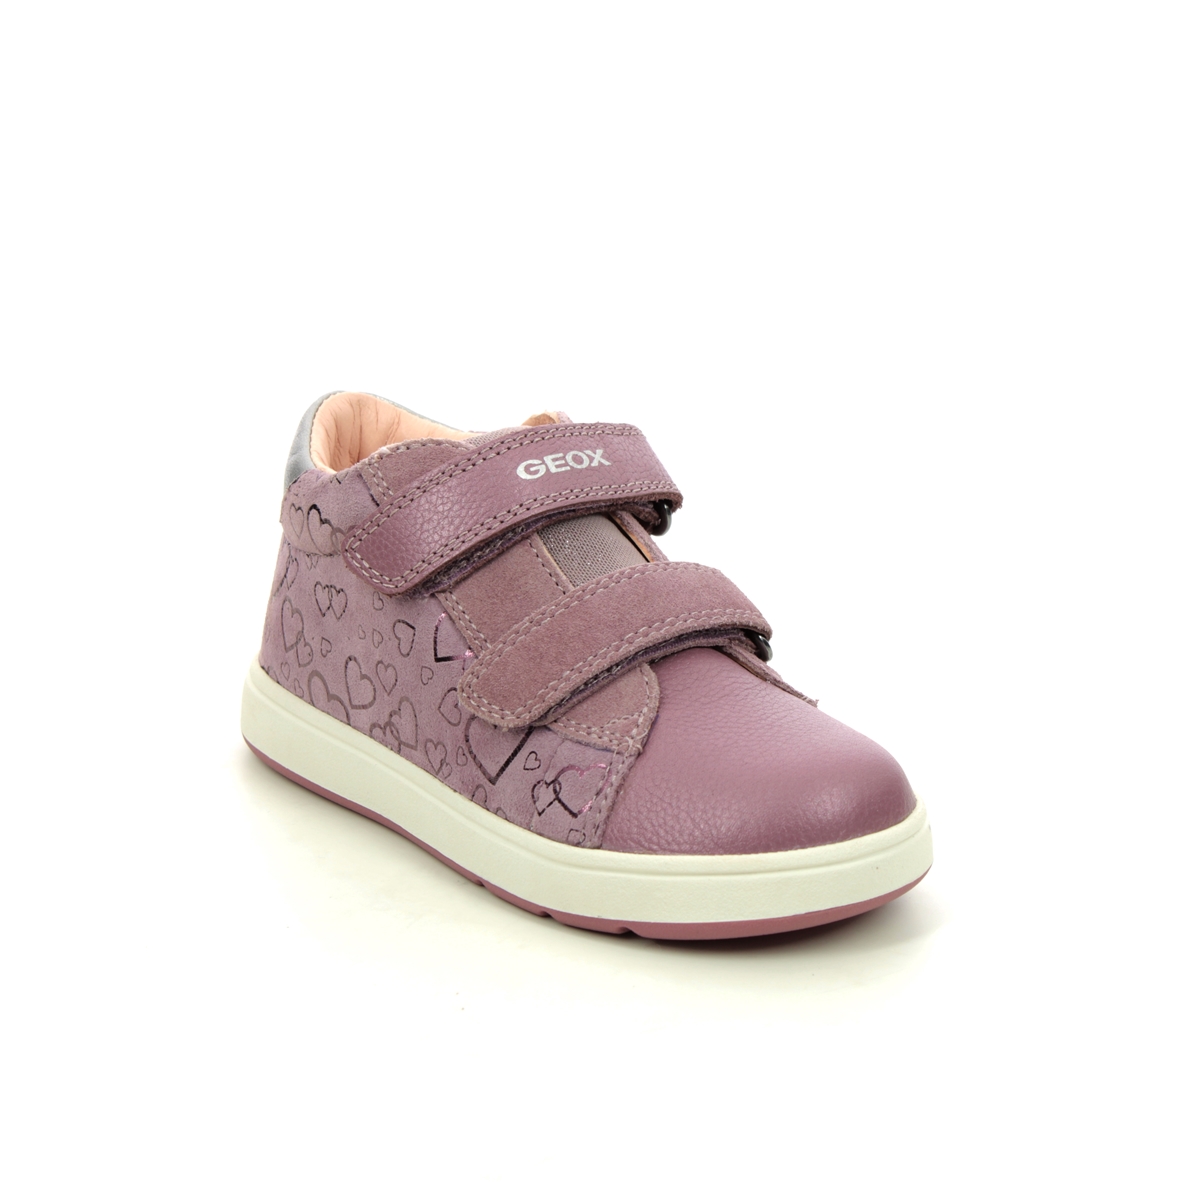 Geox - Biglia G 2V (Pink Leather) B044Cc-C8268 In Size 24 In Plain Pink Leather For kids